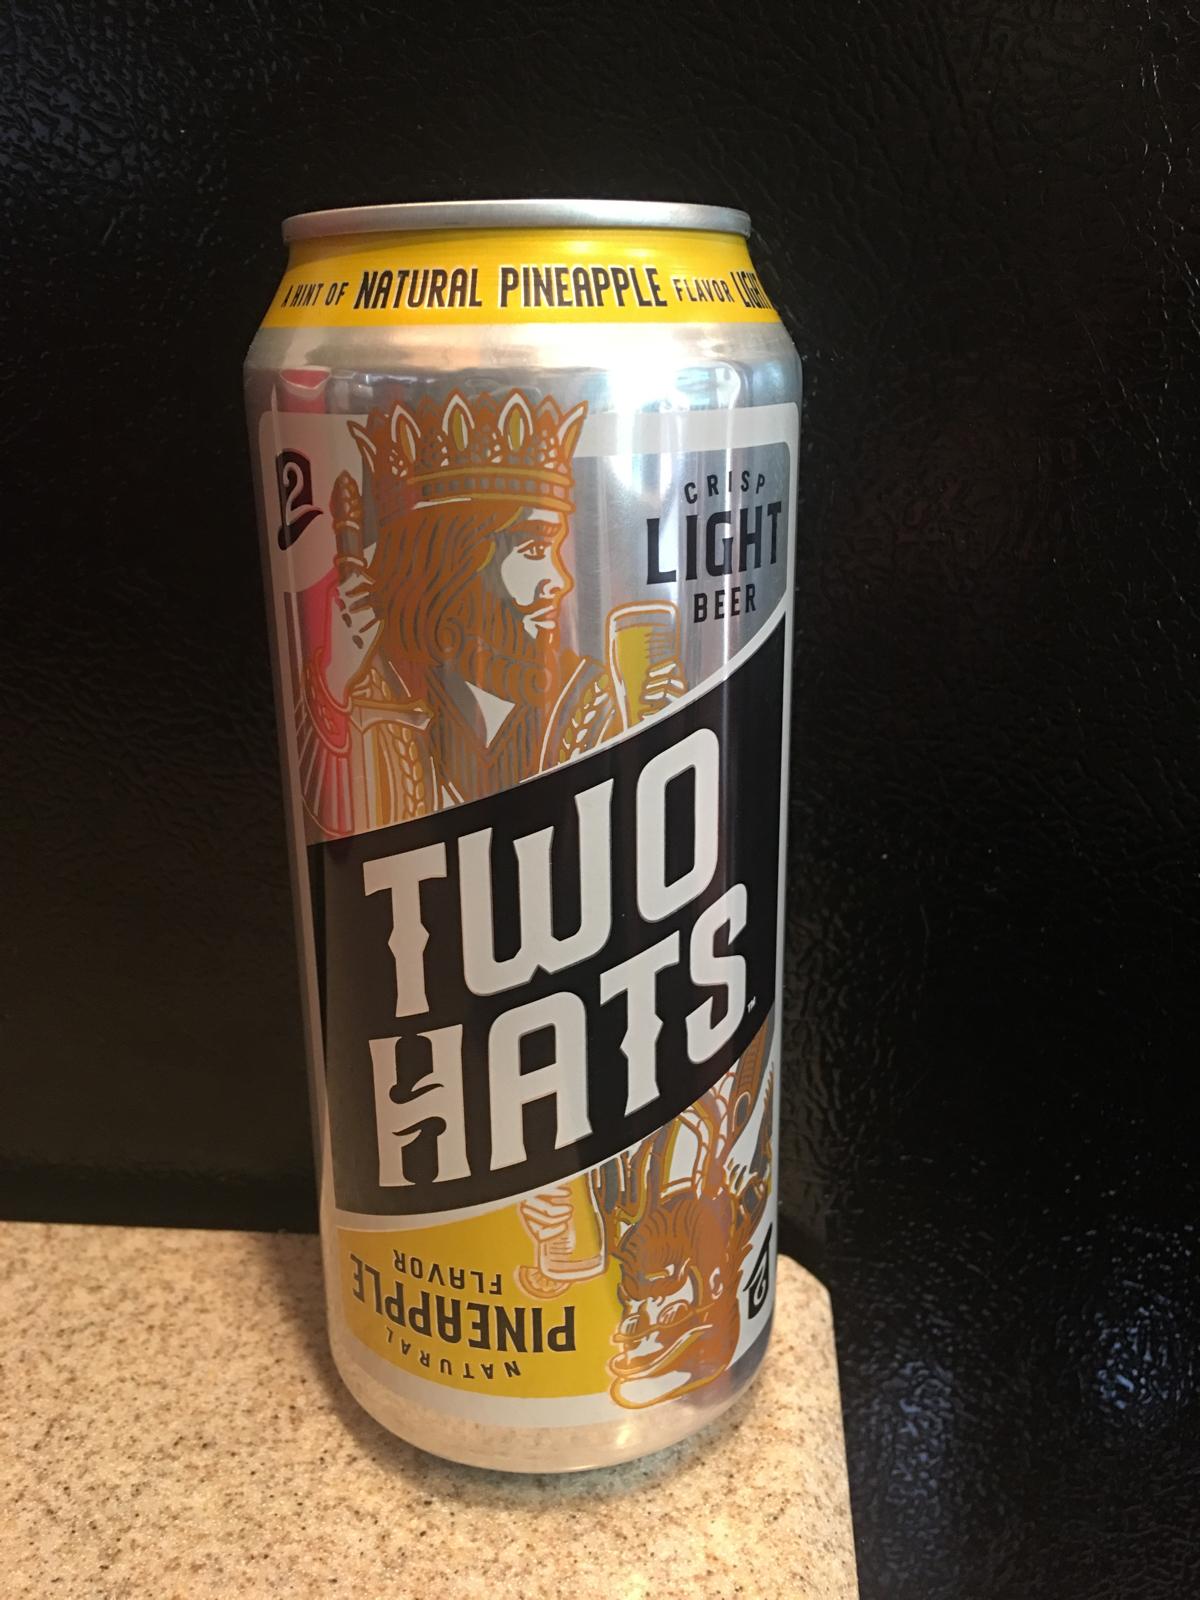 Two Hats Pineapple